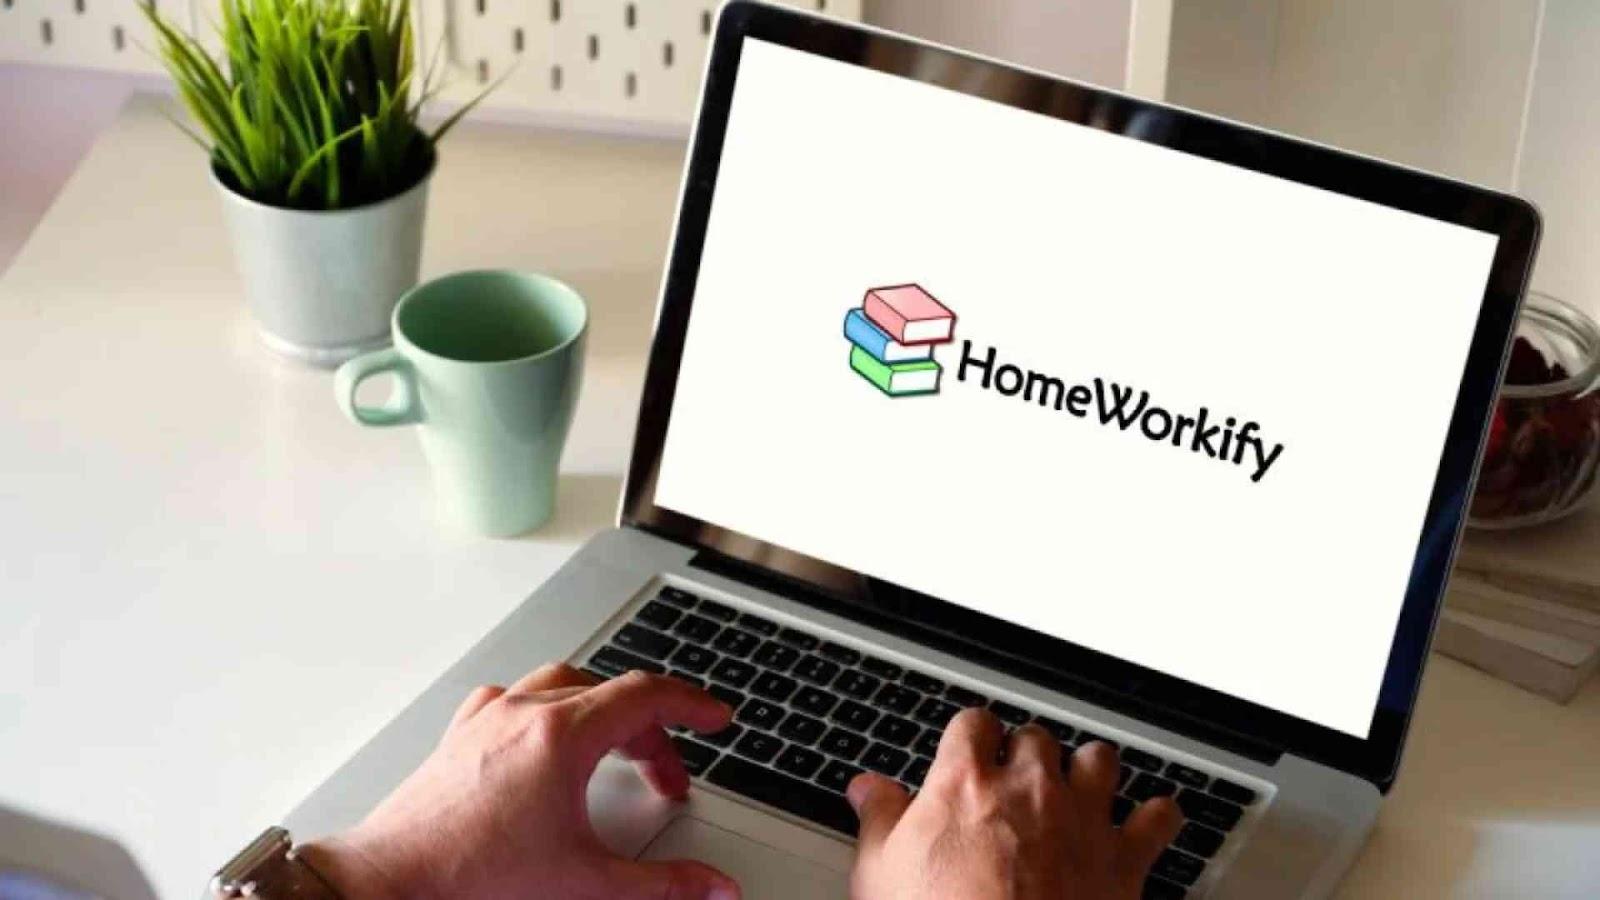 What is Homeworkify